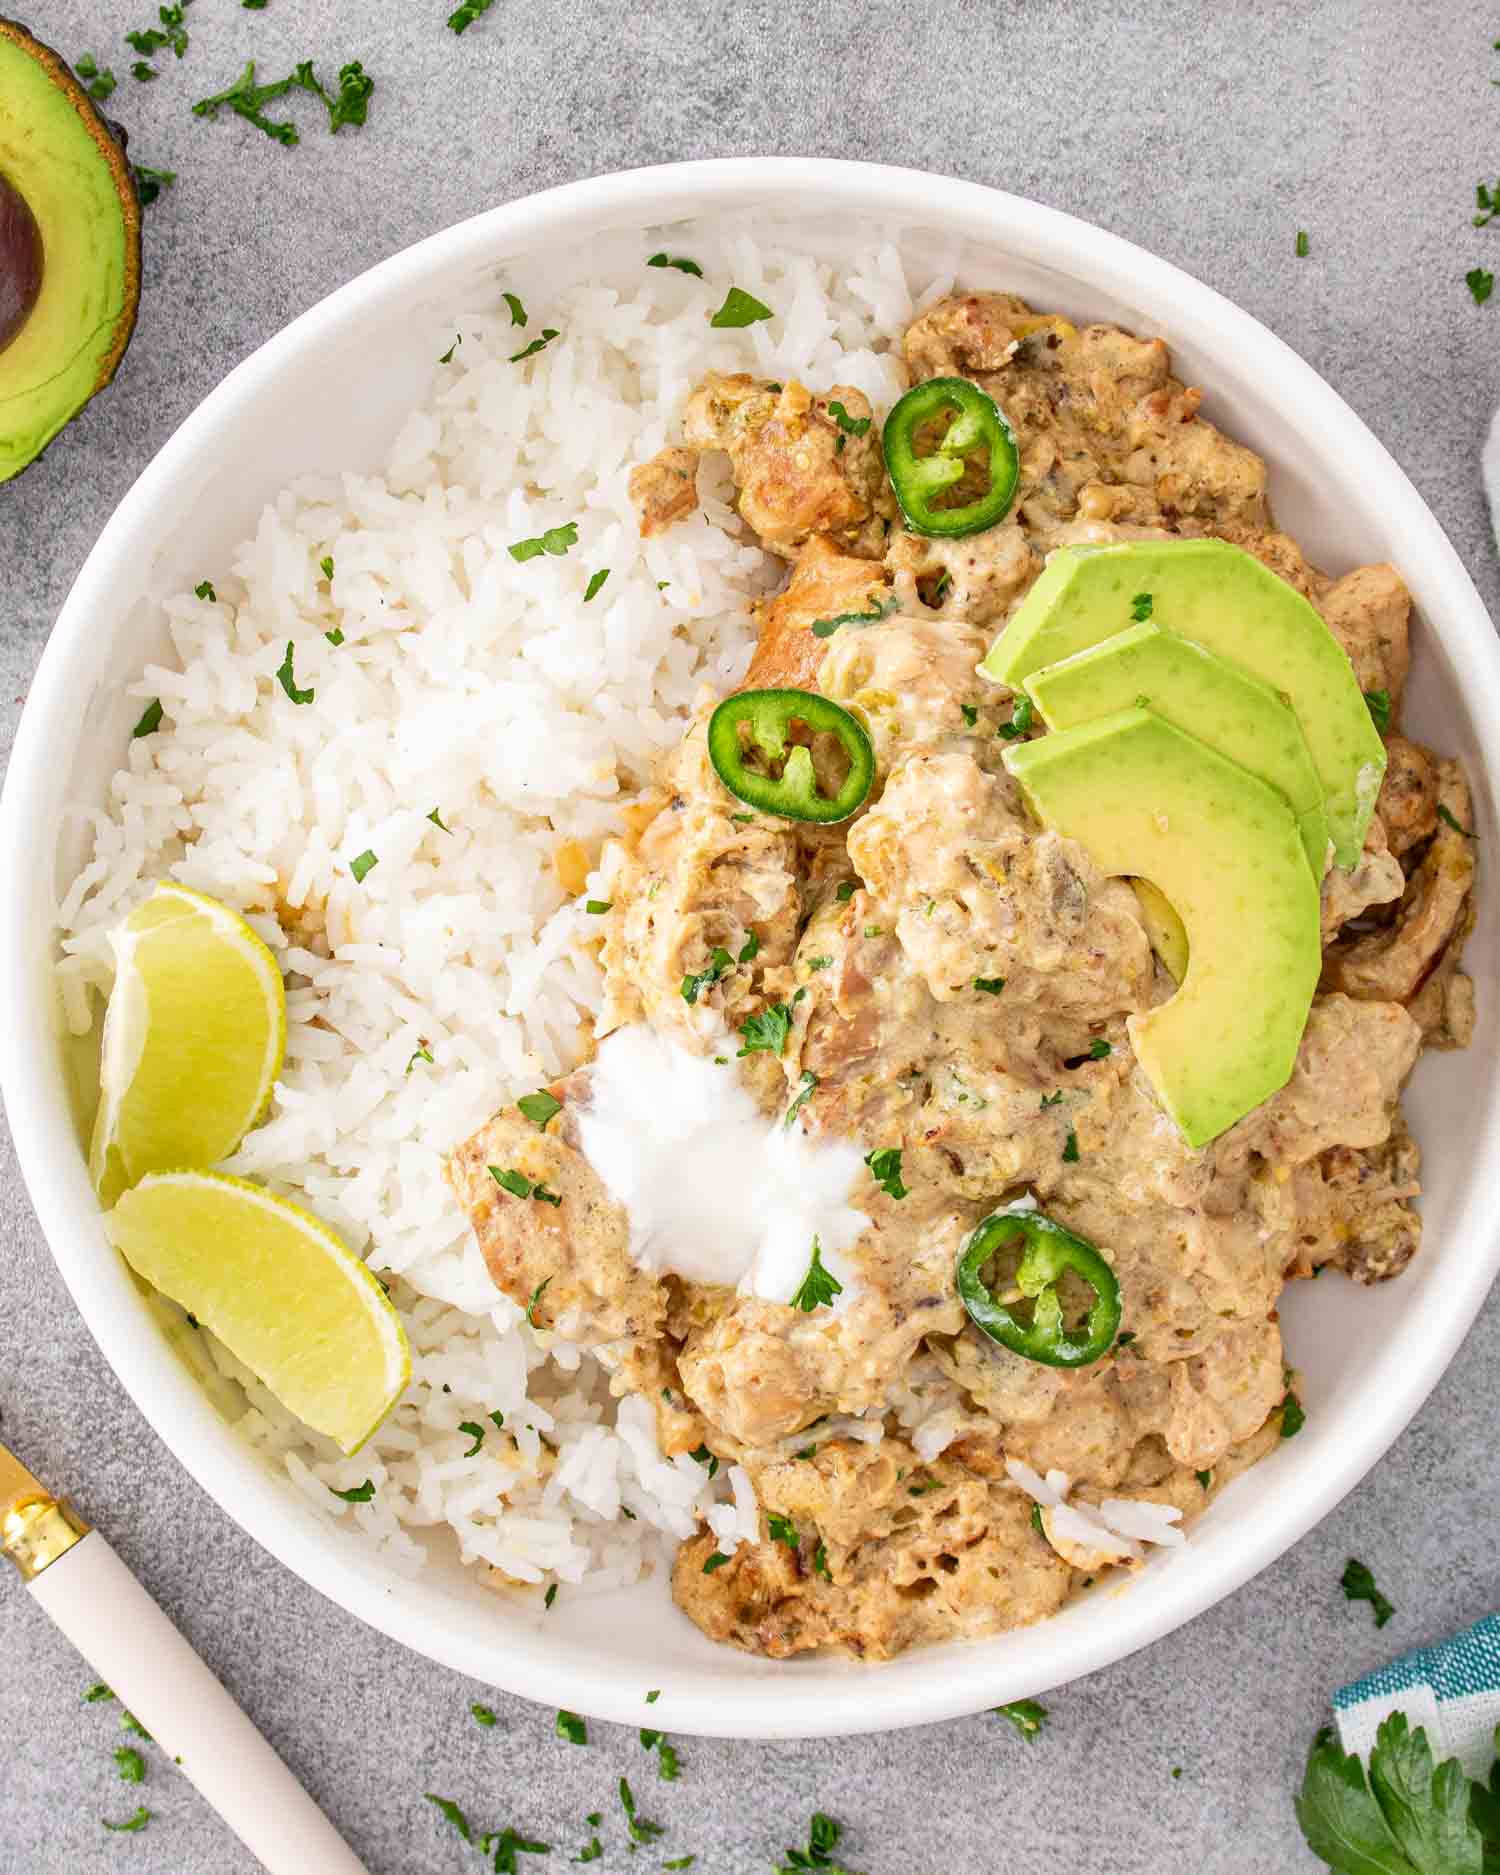 Instant Pot Green Chili Chicken - Craving Home Cooked